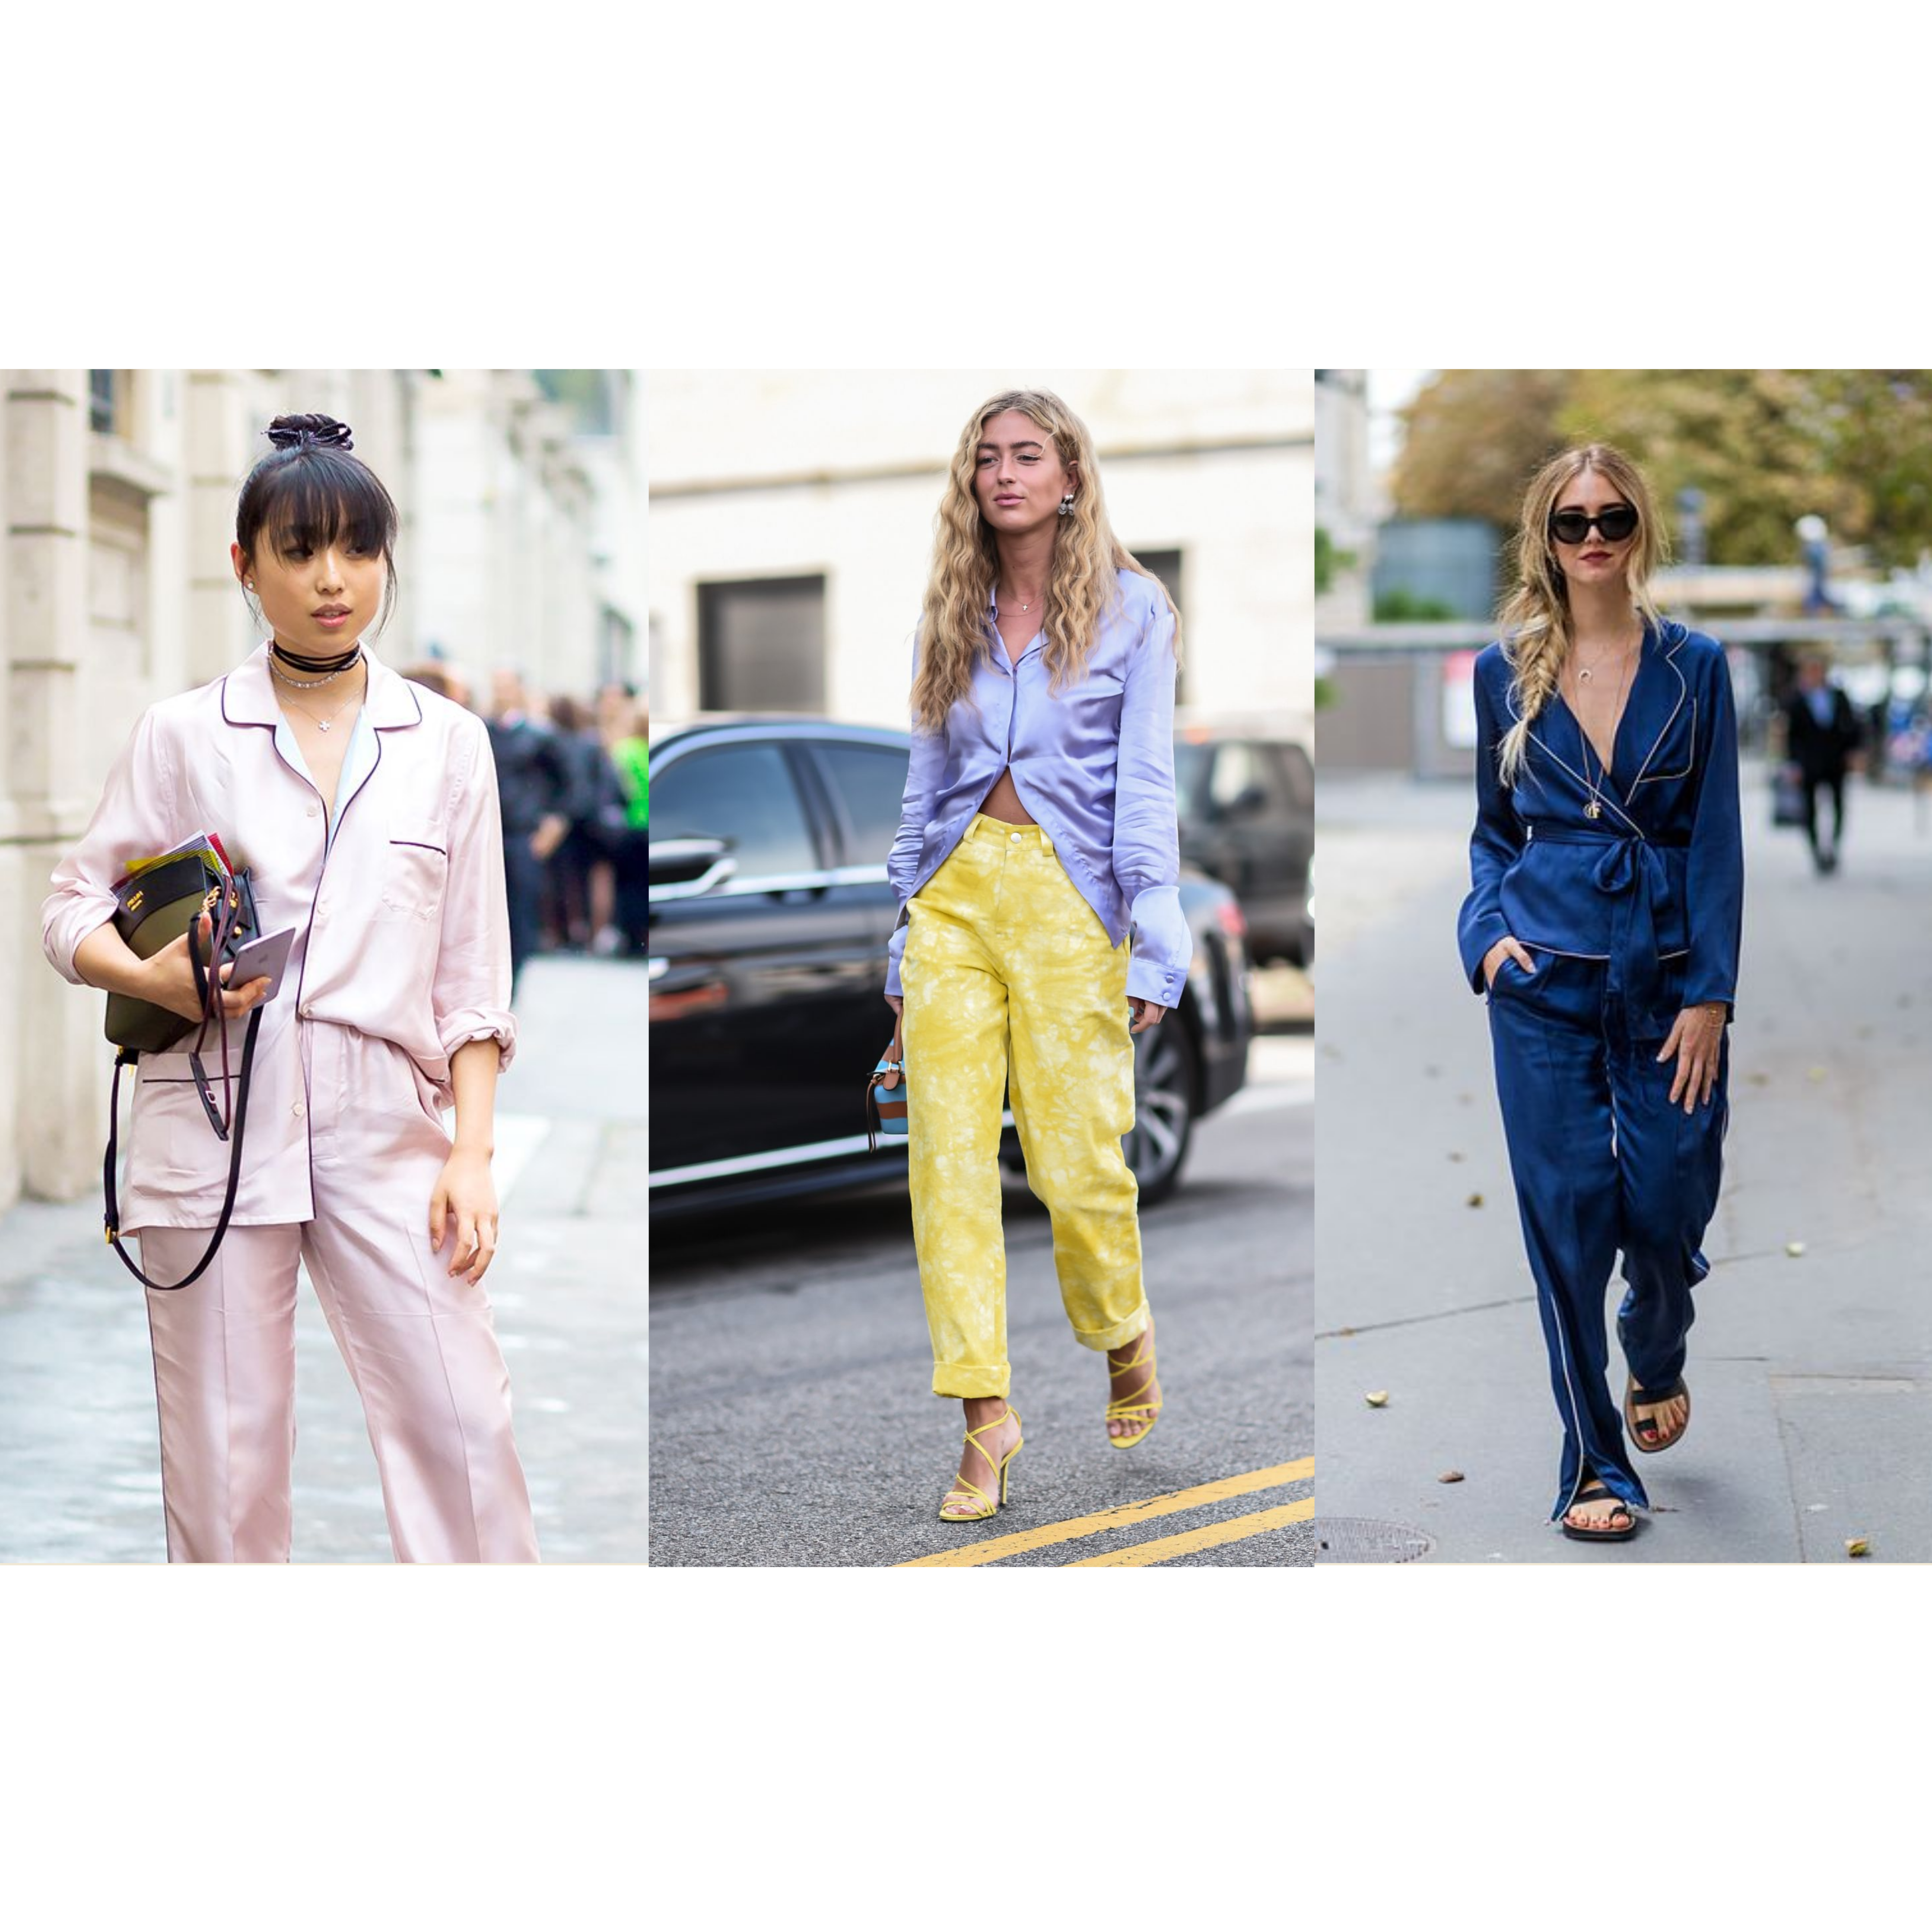 How to Wear Pajamas Outside: 4 Trendy Ways to Style PJs as Outerwear - Avec Amour Lingerie Boutique